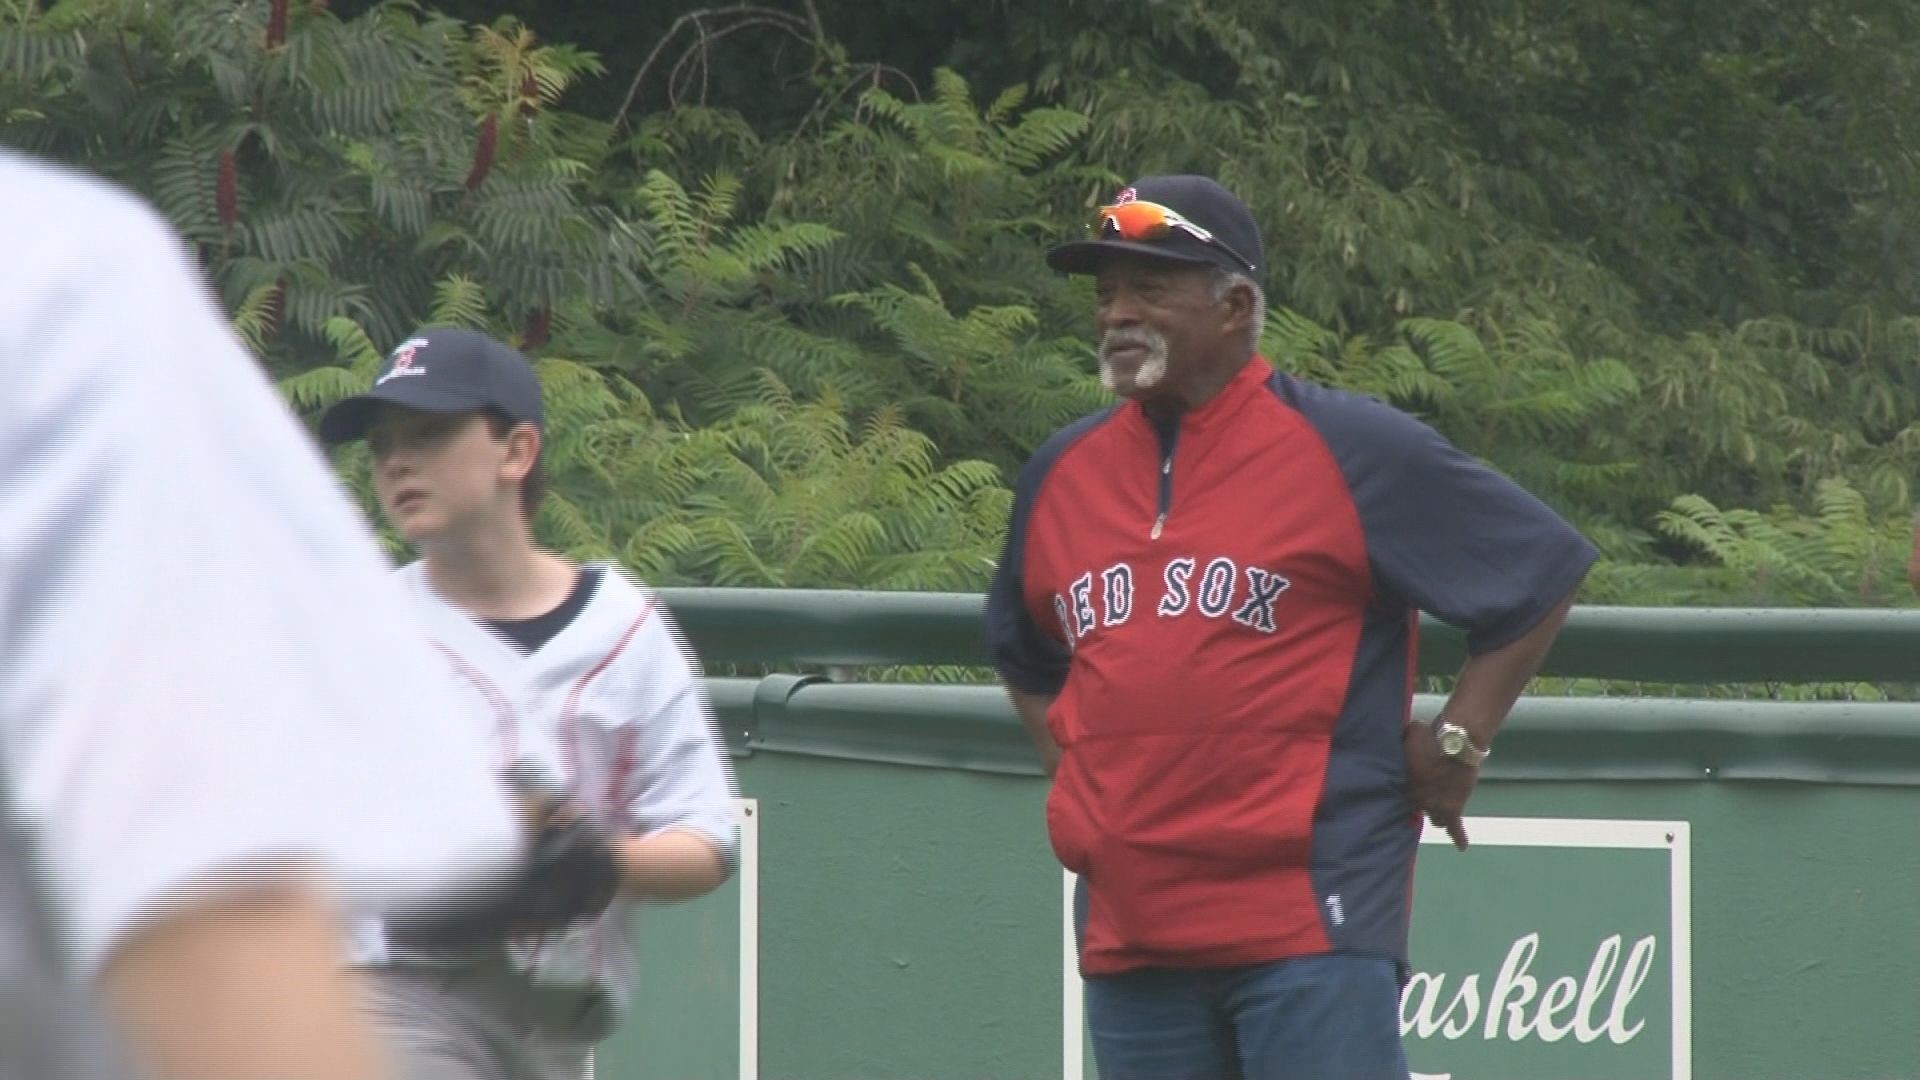 The memories that Red Sox great Luis Tiant imparted to young players at a clinic in Oakland on July 29, 2013, were just as important as the skills he taught to them.